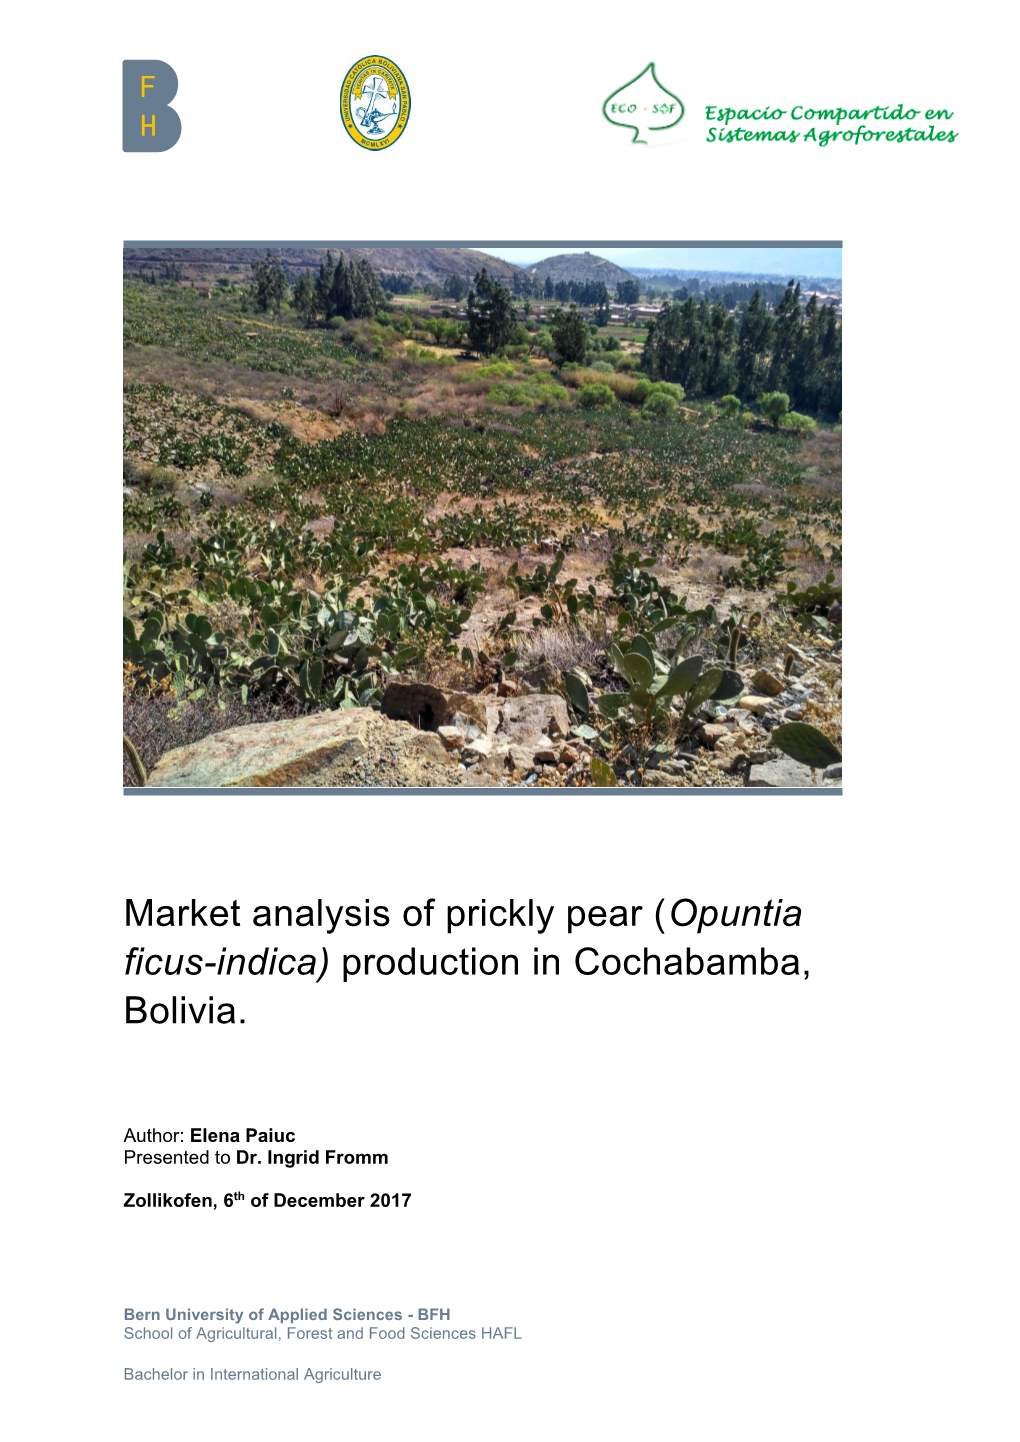 Market Analysis of Prickly Pear (Opuntia Ficus-Indica) Production in Cochabamba, Bolivia